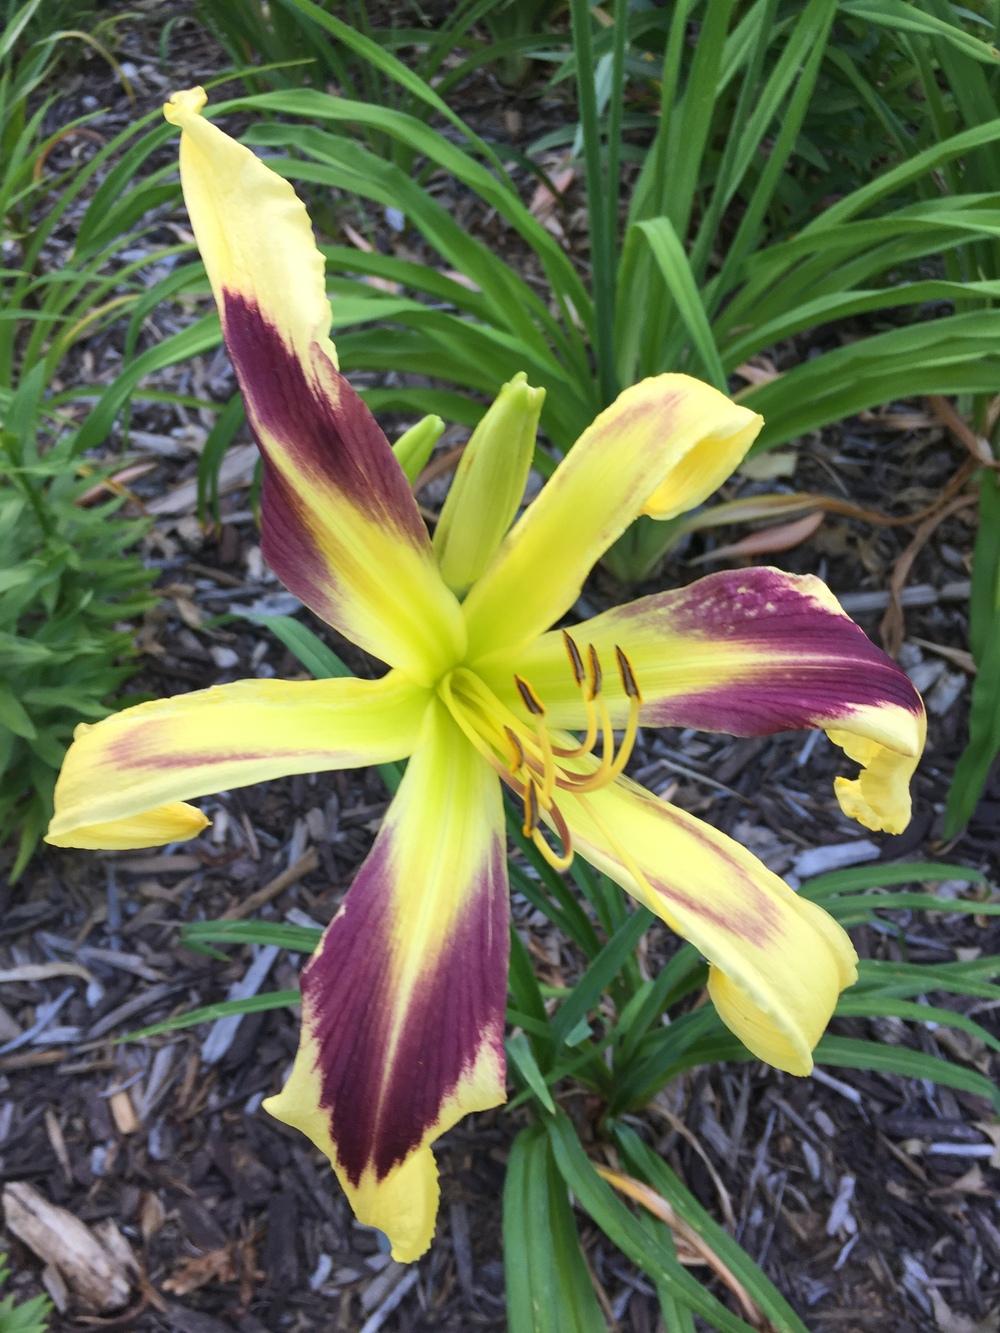 Photo of Daylily (Hemerocallis 'Aerial Display') uploaded by jdseely1